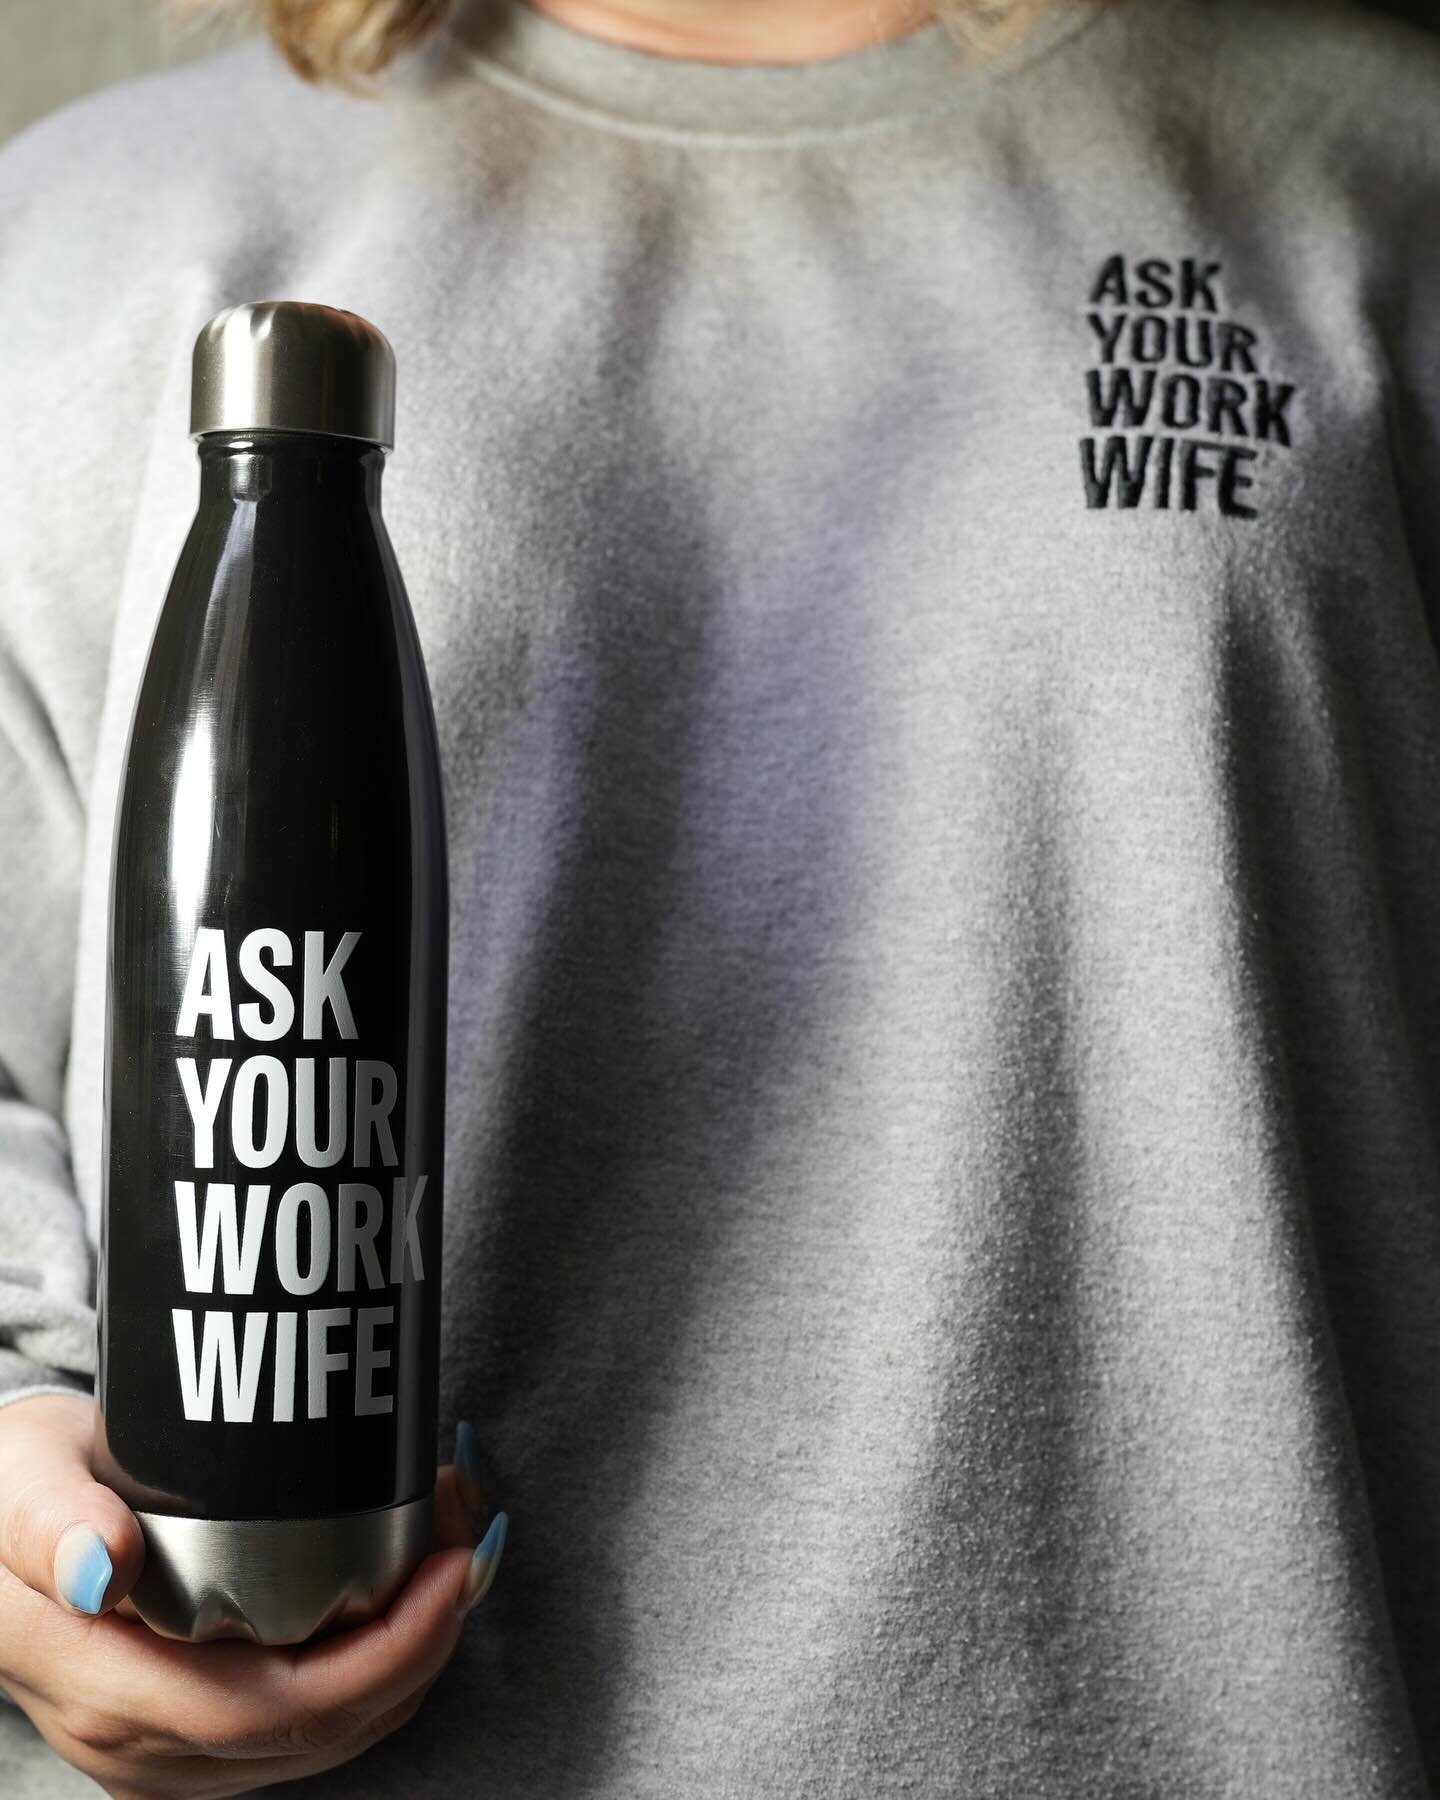 If your podcast doesn&rsquo;t have merch, are you even doing it right??!! 

No joke 👉👉 run, don&rsquo;t walk to the link in our bio for the first ever merch drop from Ask Your Work Wife. 

(don&rsquo;t see something you want? That&rsquo;s okay. Add